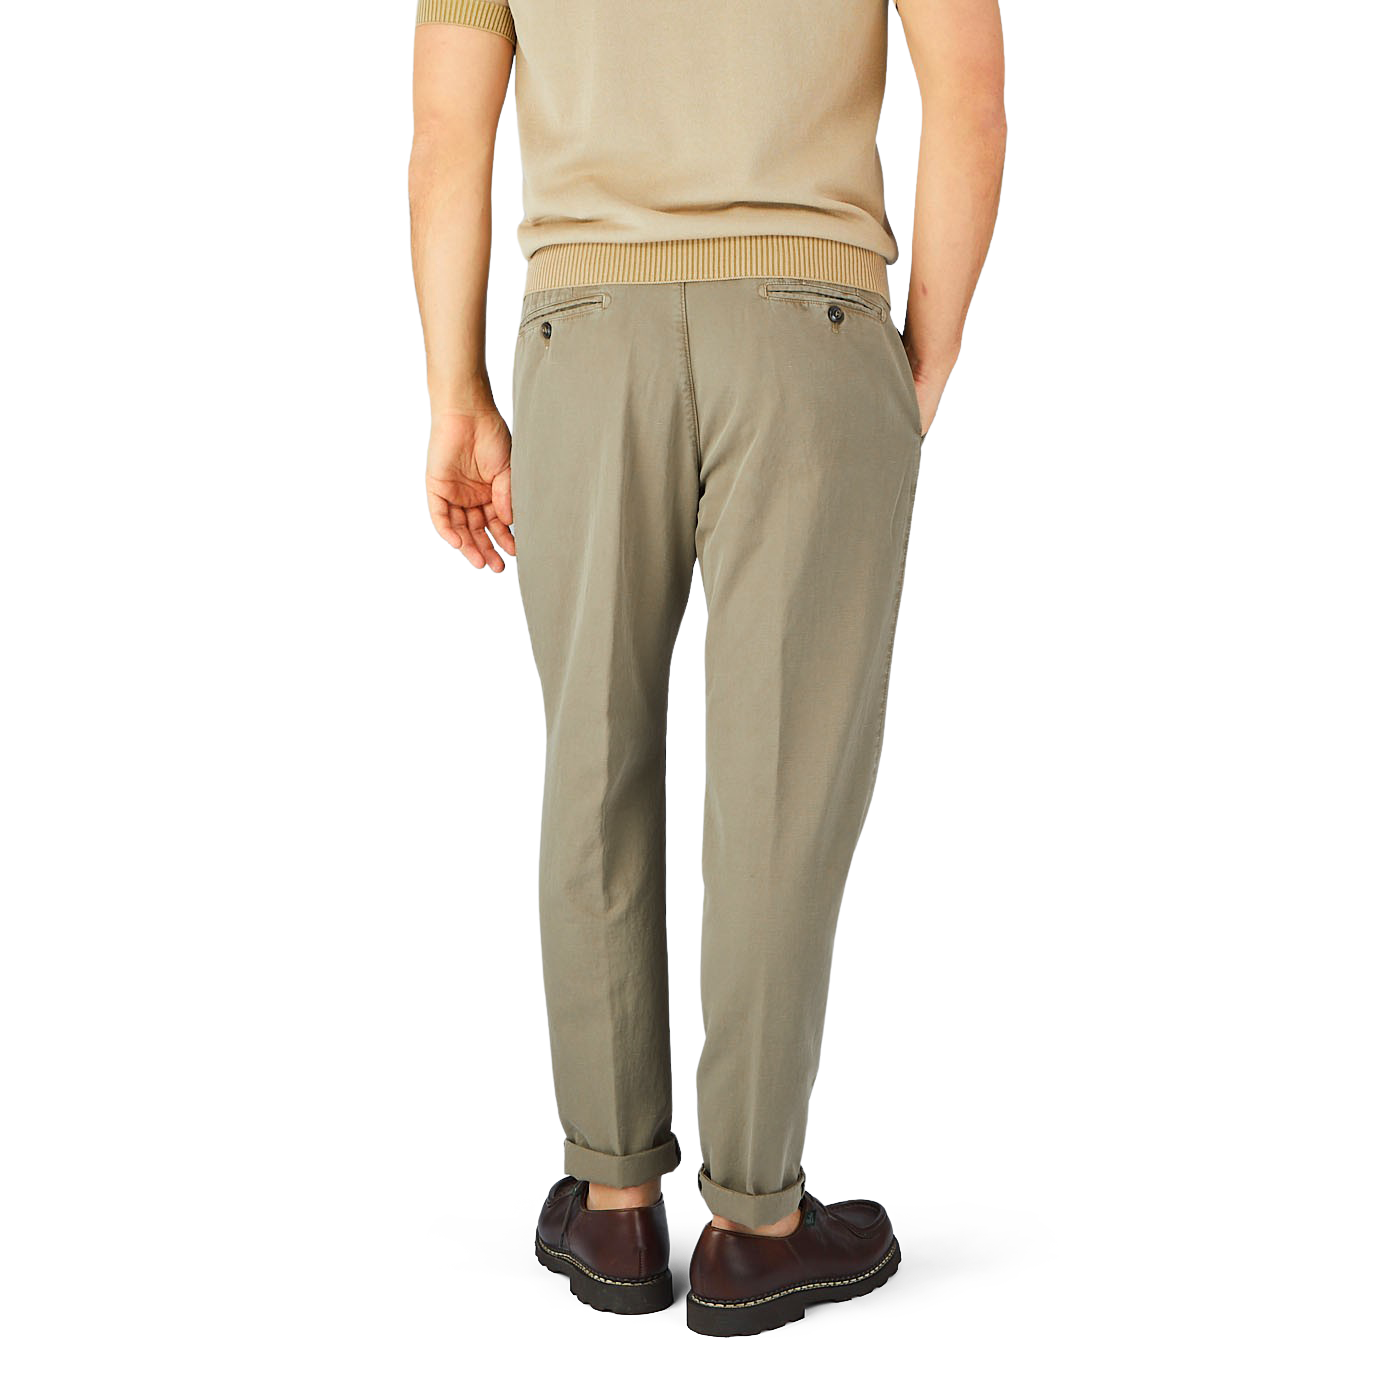 The man in the tan sweater and green trousers has a Briglia Olive Cotton Linen BG59 Pleated Chinos, with a slim fit and adjustable waistband.